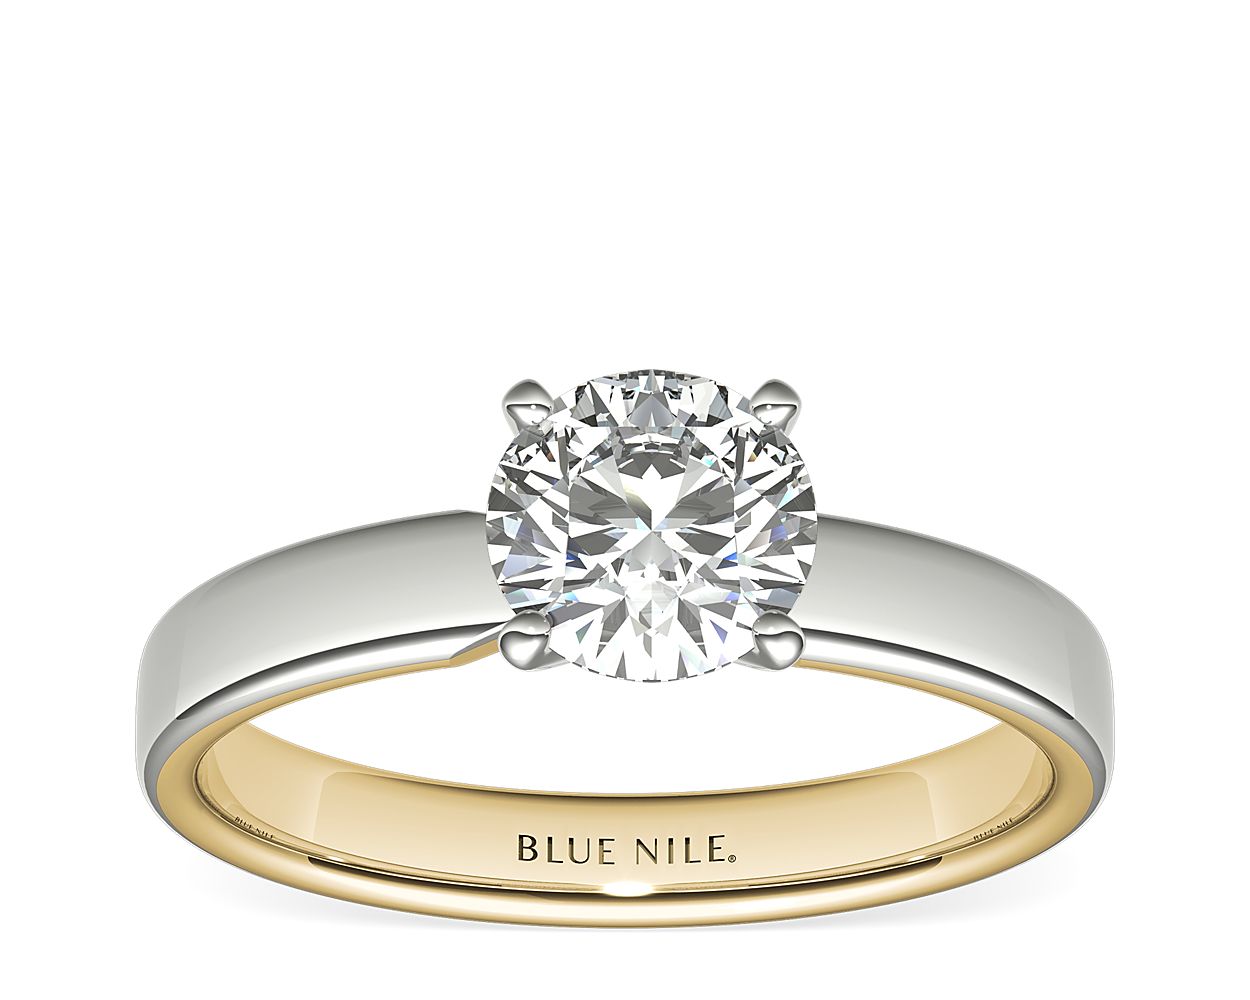 Polish Two-Tone Solitaire Diamond Engagement Ring in 14k White and Yellow Gold